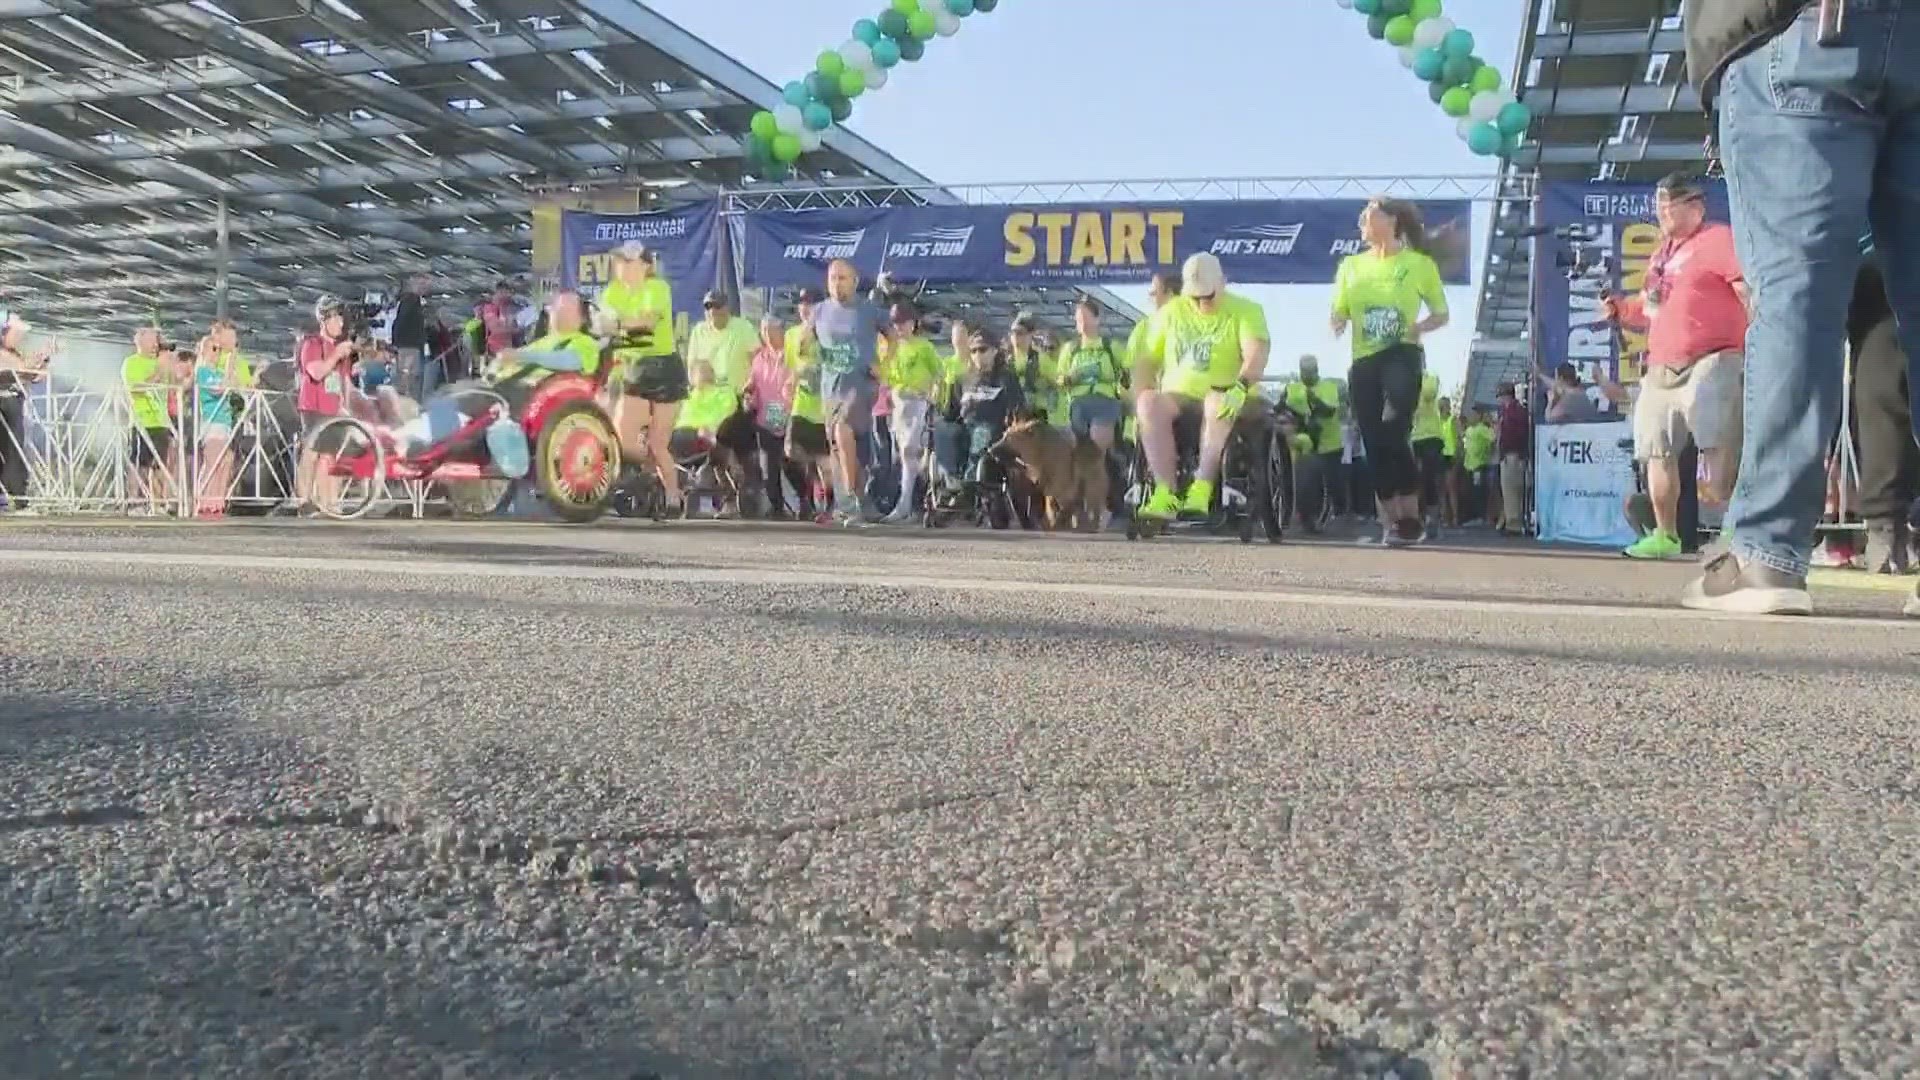 Thousands of people laced up their sneakers and hit the pavement for the 19th annual Pat's Run in Tempe.